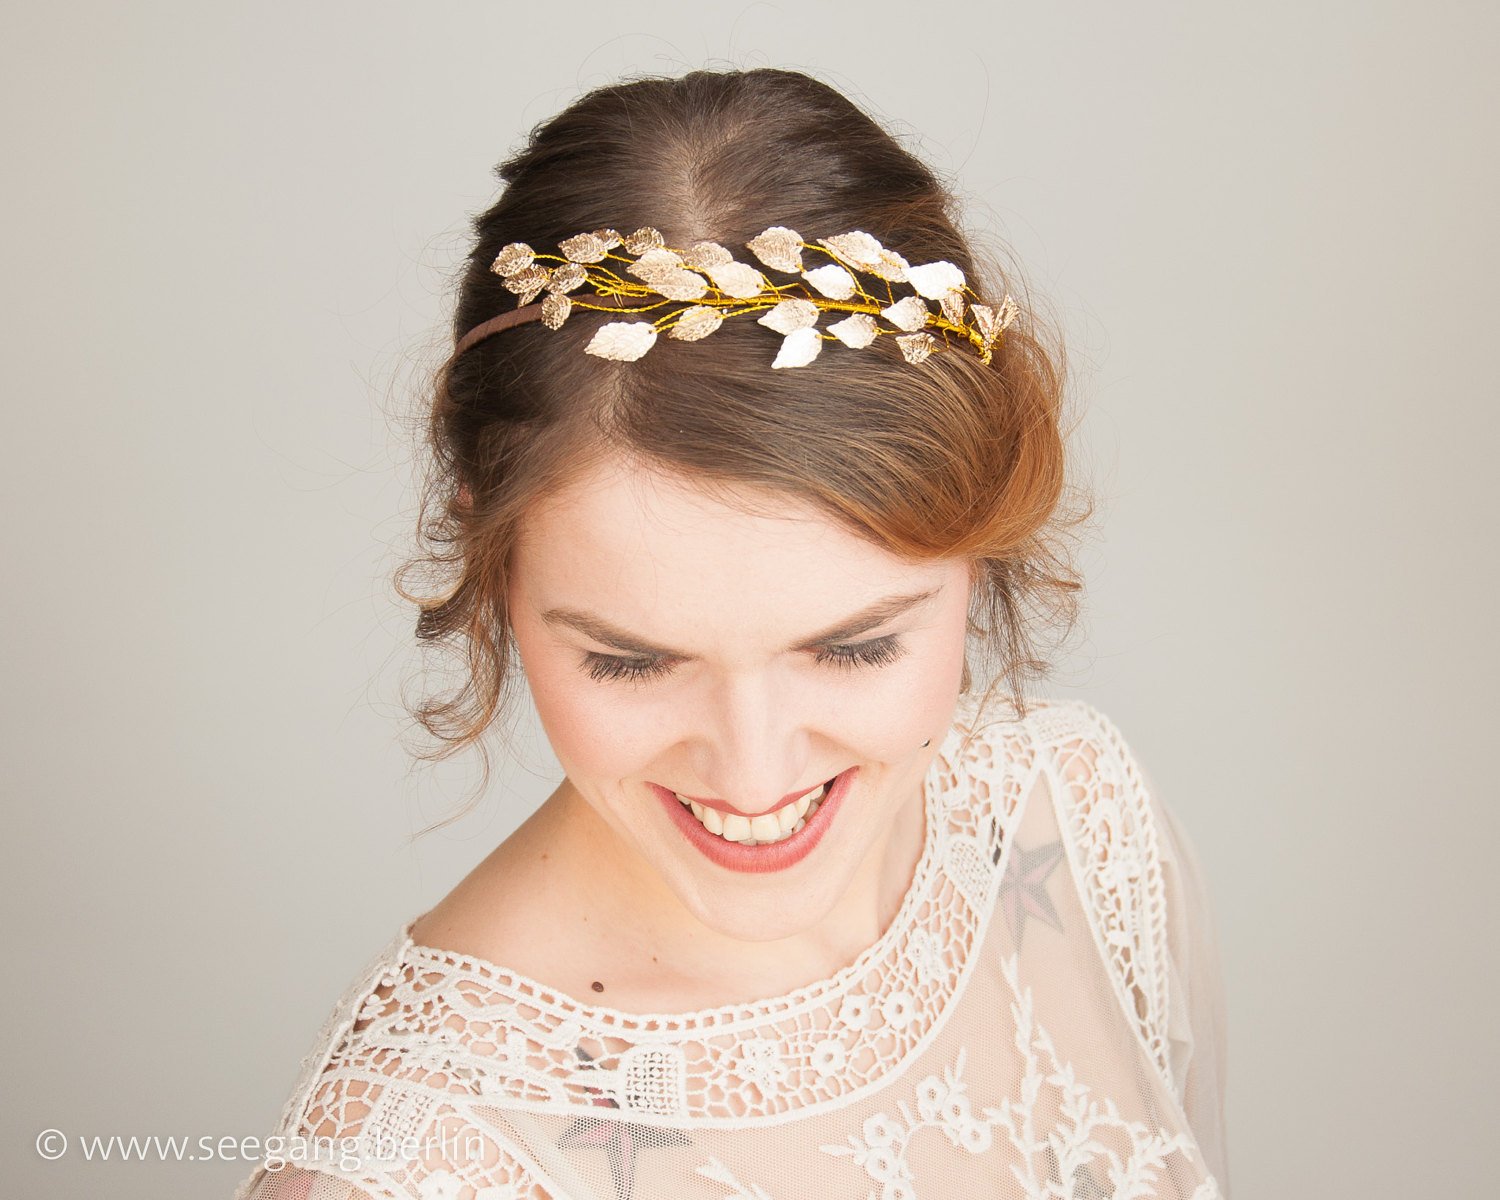 HAIR CIRCLET - BRIDAL JEWELLERY WITH FAIRY LEAFS IN RED GOLD COLOUR FOR WOODLAND STYLES © Seegang Berlin